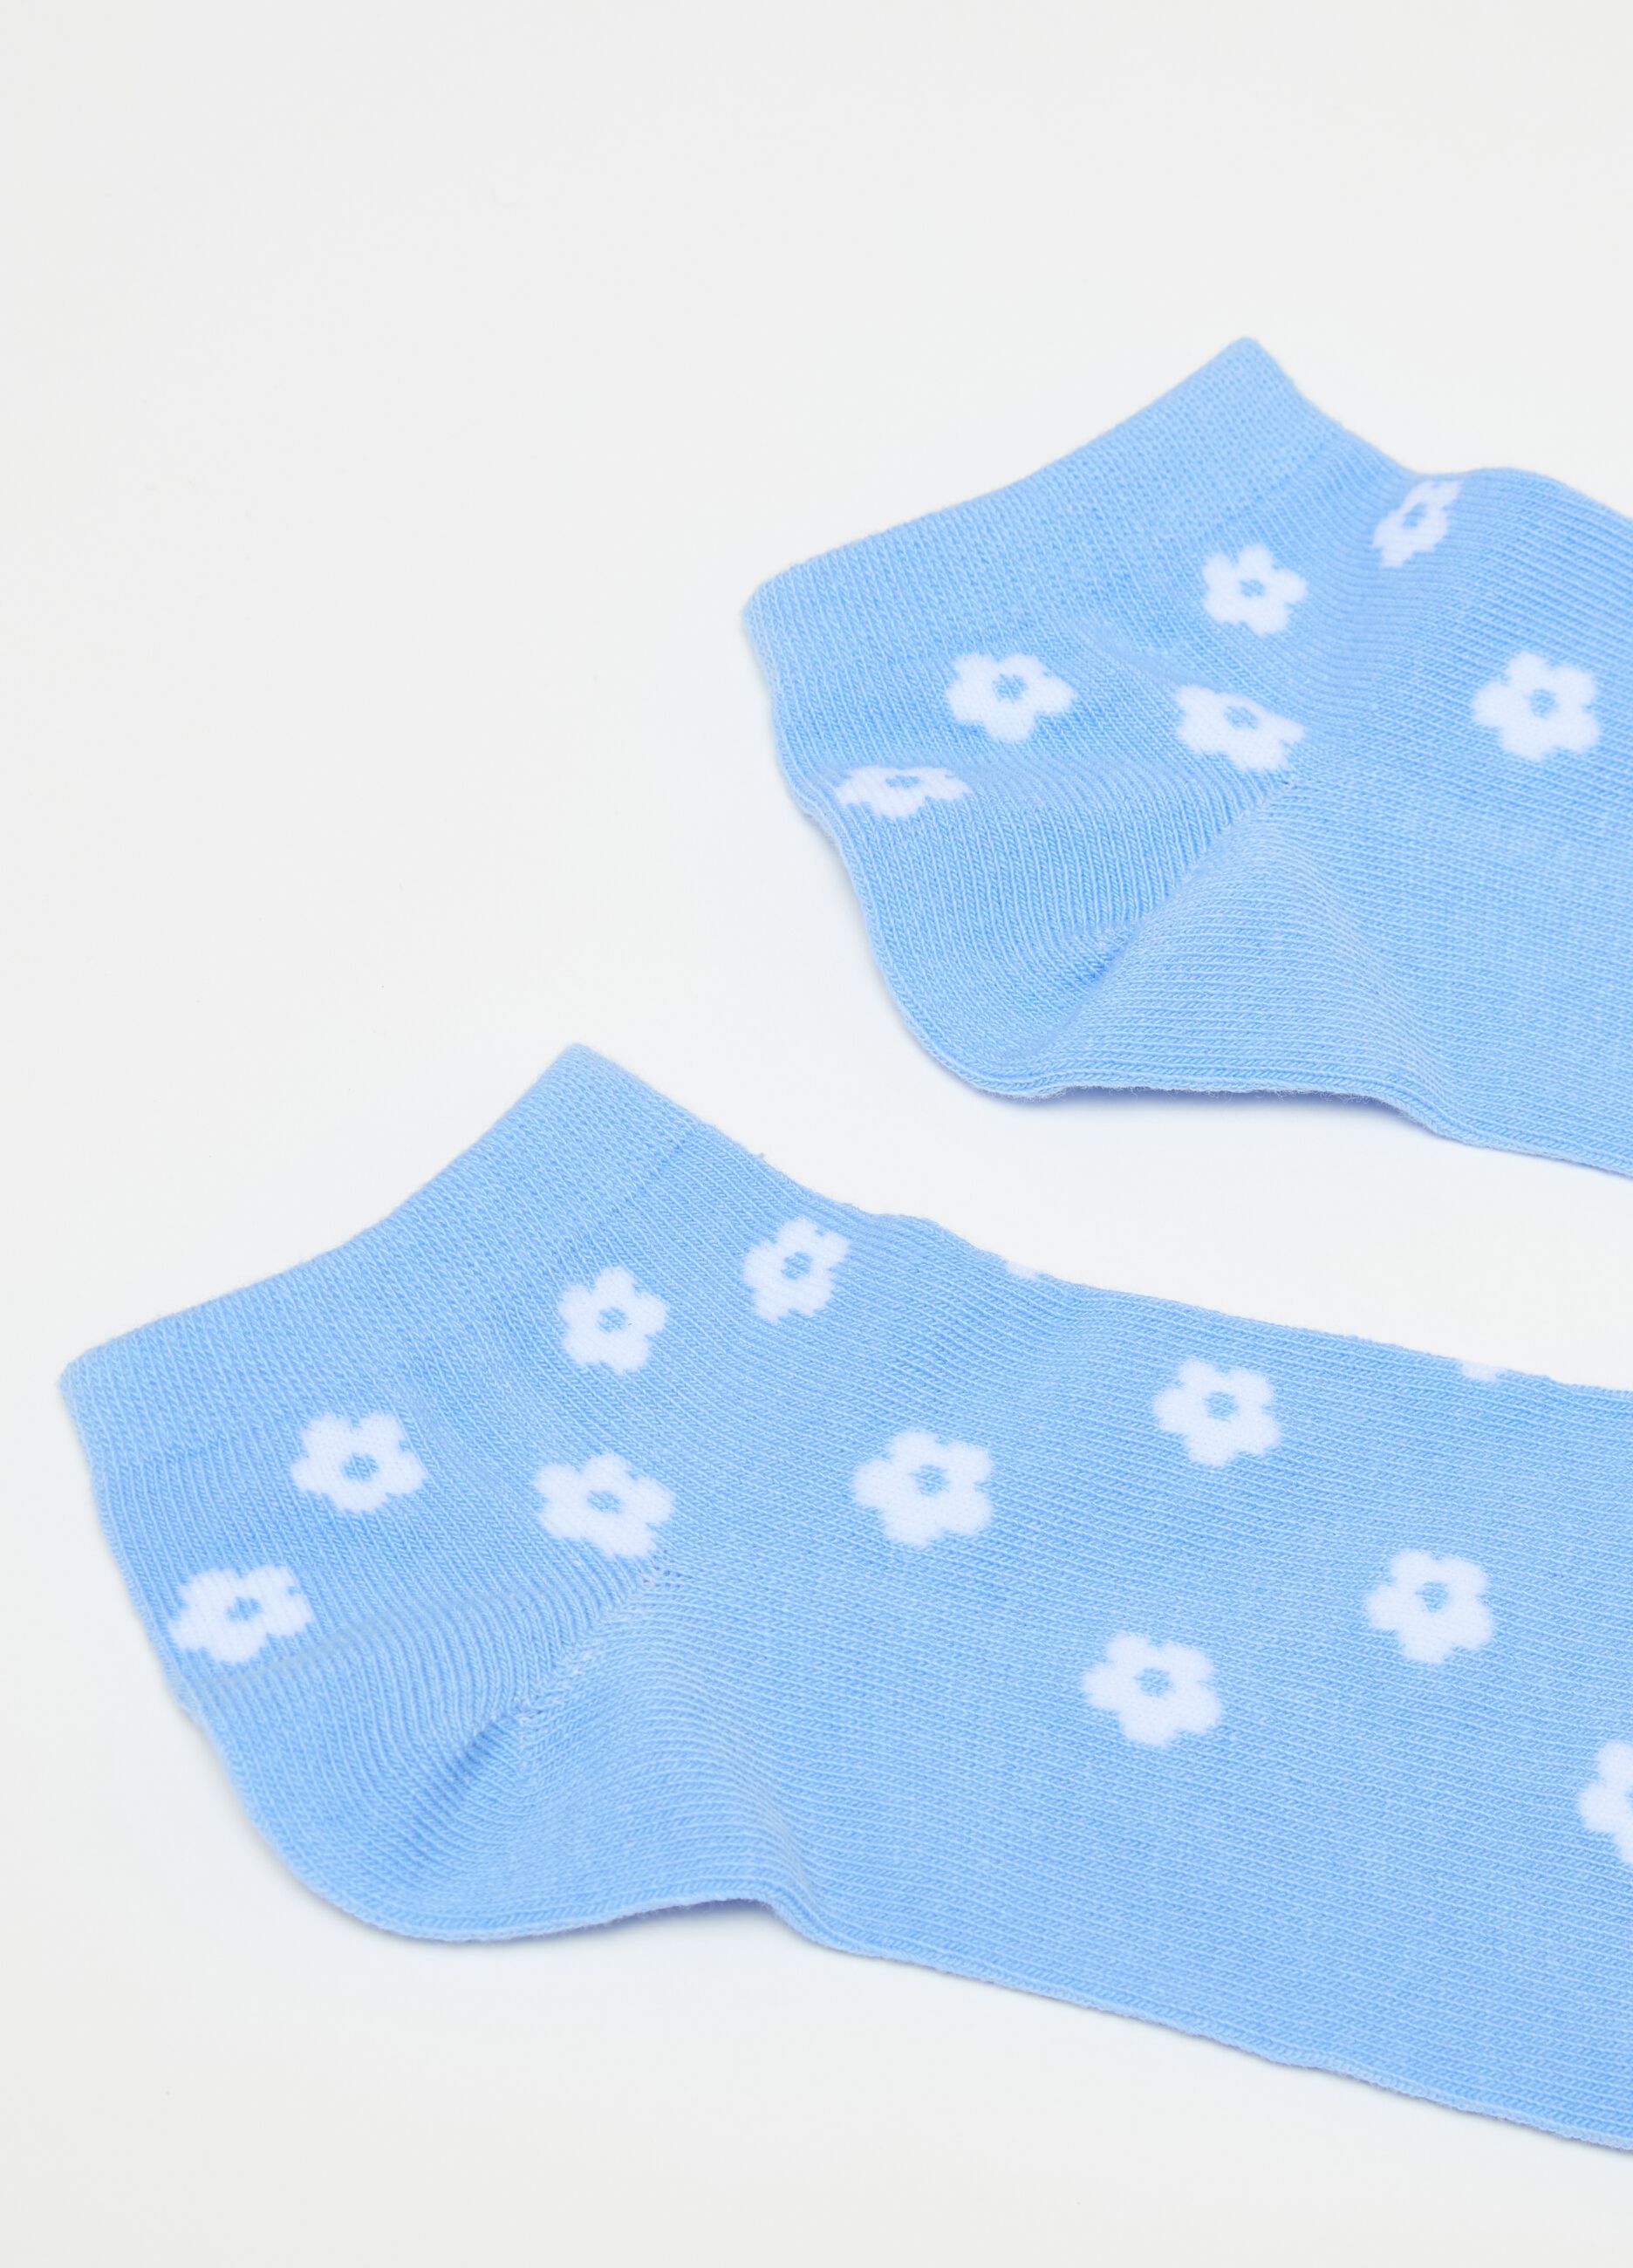 Seven-pair pack shoe liners with small flowers